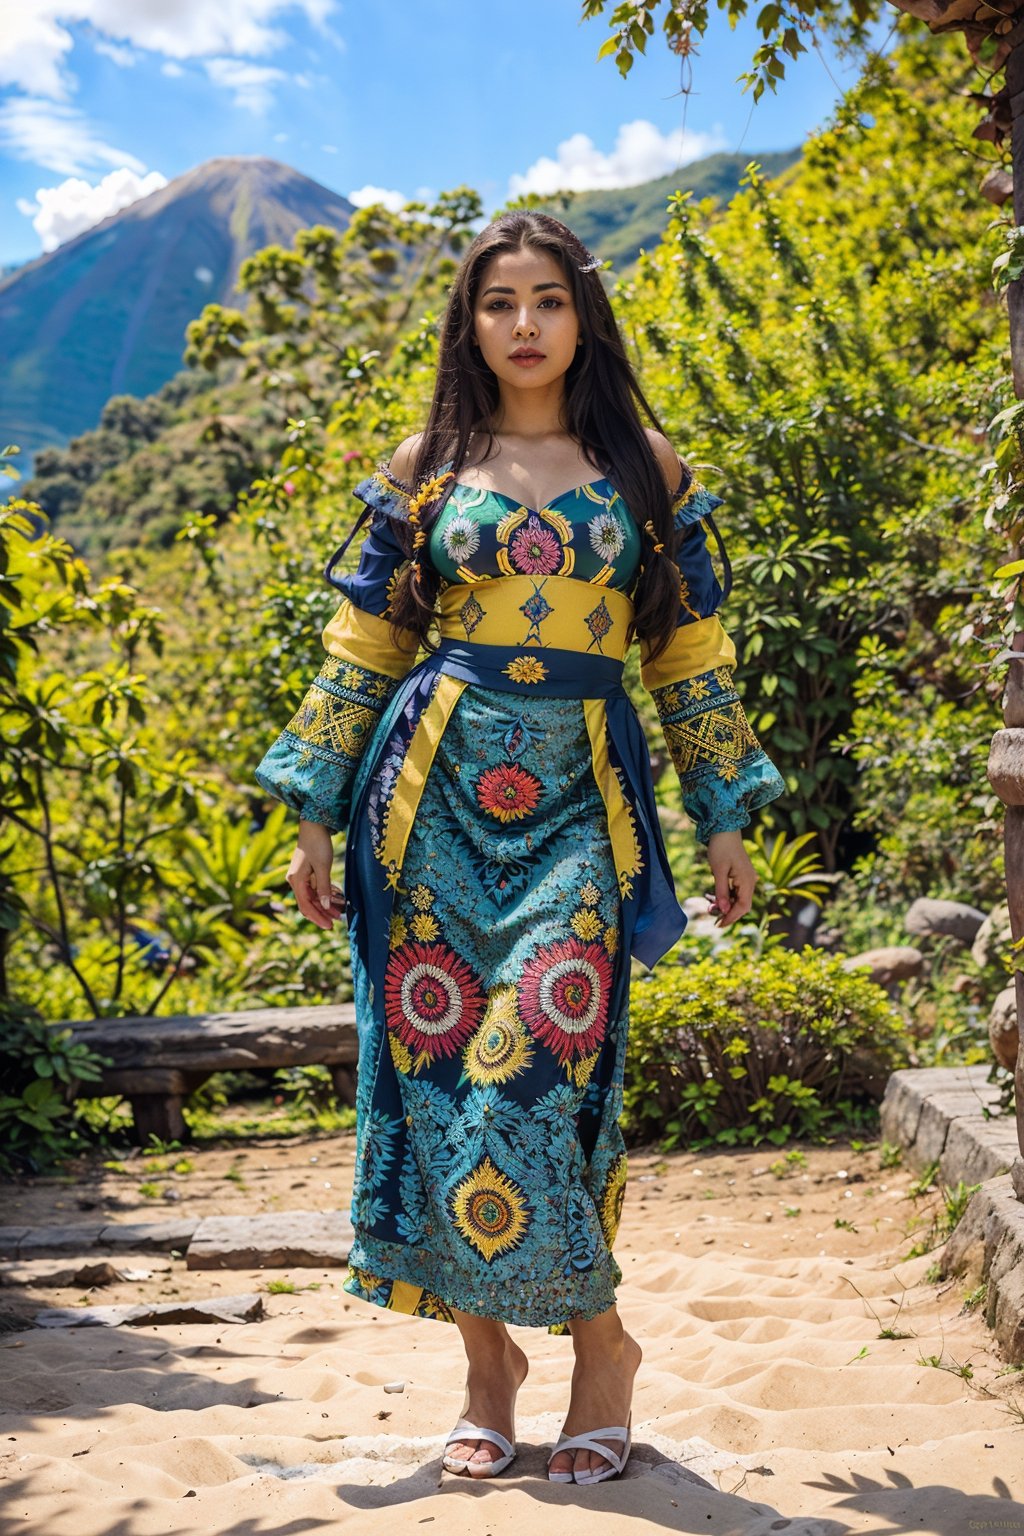 Create a full-body image featuring a woman representing the beauty and diversity of Ecuador. The woman should embody a random representative race, with a skin color and eye color that reflects the rich mosaic of ethnicities found in Ecuador. She should be dressed in traditional Ecuadorian clothing with a contemporary twist, blending elements from indigenous cultures like Kichwa, Shuar, or Waorani with modern fashion sensibilities. The attire should be colorful and intricately designed, showcasing the intricate textiles and vibrant patterns typical of Ecuadorian craftsmanship.

Her posture should exude confidence and grace, with subtle hints of the country's cultural heritage in her stance. The background should depict a scene that captures the essence of Ecuador, such as the lush greenery of the Amazon rainforest, the majestic peaks of the Andes mountains, or the serene beauty of the Galápagos Islands. The background should be filled with rich details that immerse the viewer in the unique sights and sounds of Ecuadorian life, whether it's the vibrant street markets, traditional music, or the colorful festivities of local celebrations.